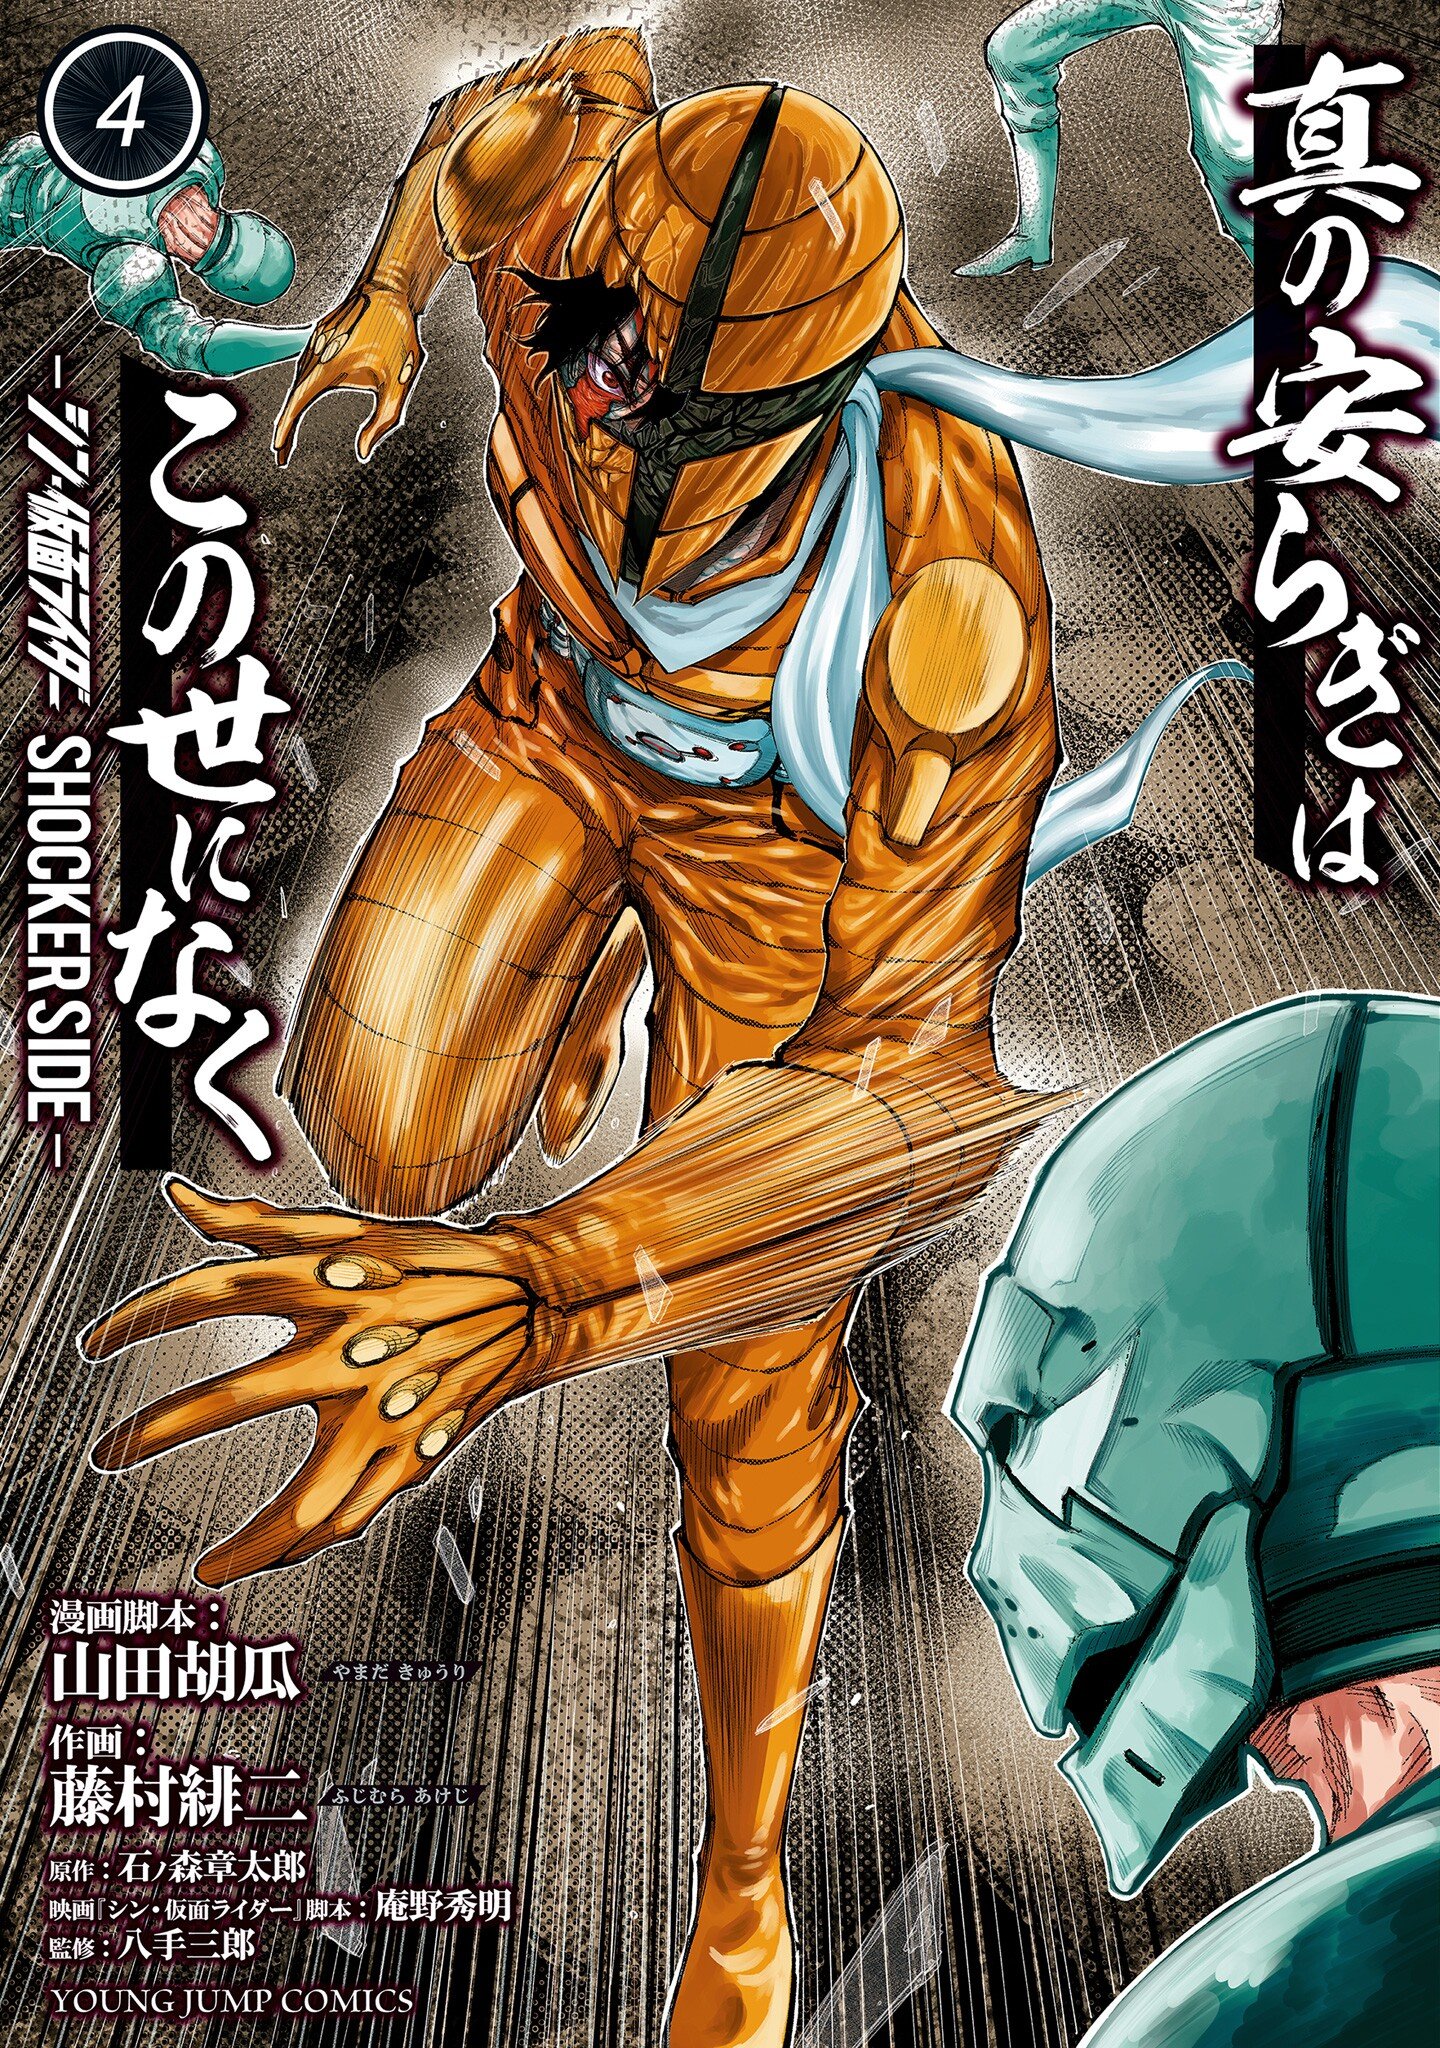 There Is No True Peace in This World -Shin Kamen Rider SHOCKER SIDE- cover 0